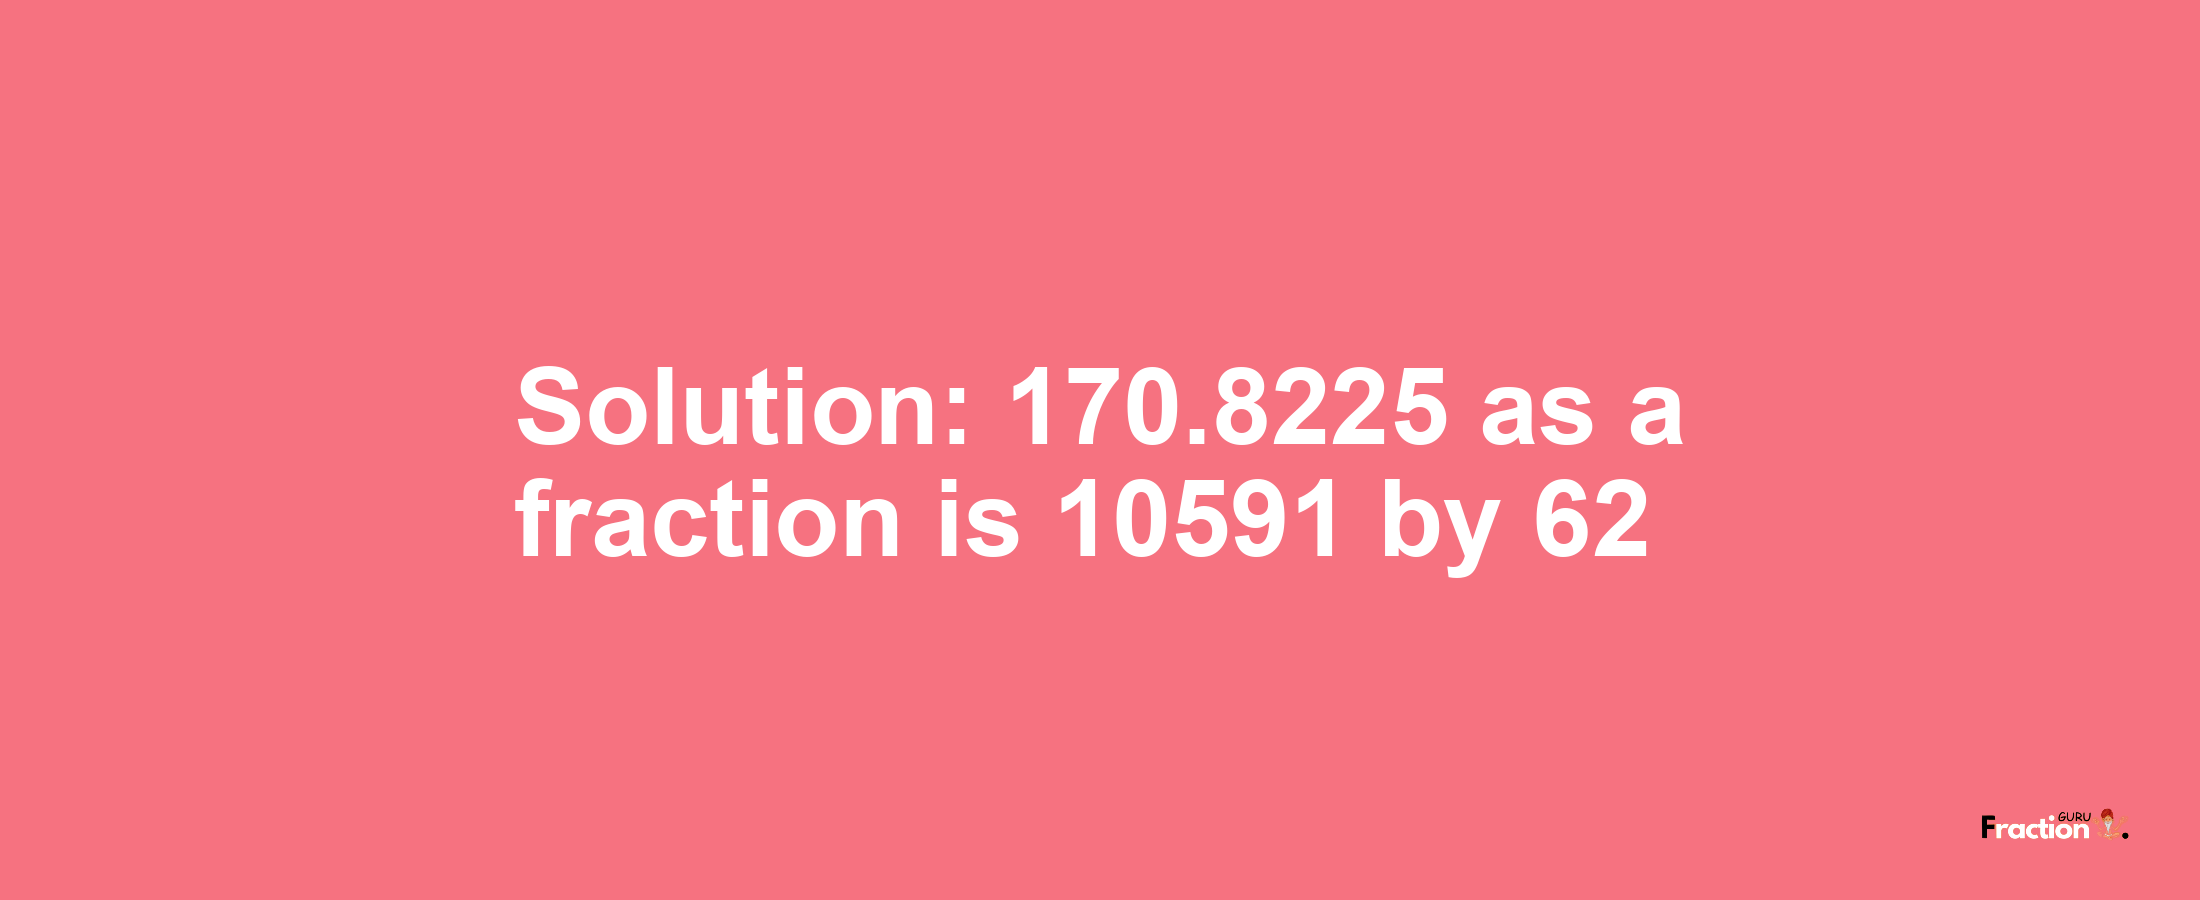 Solution:170.8225 as a fraction is 10591/62